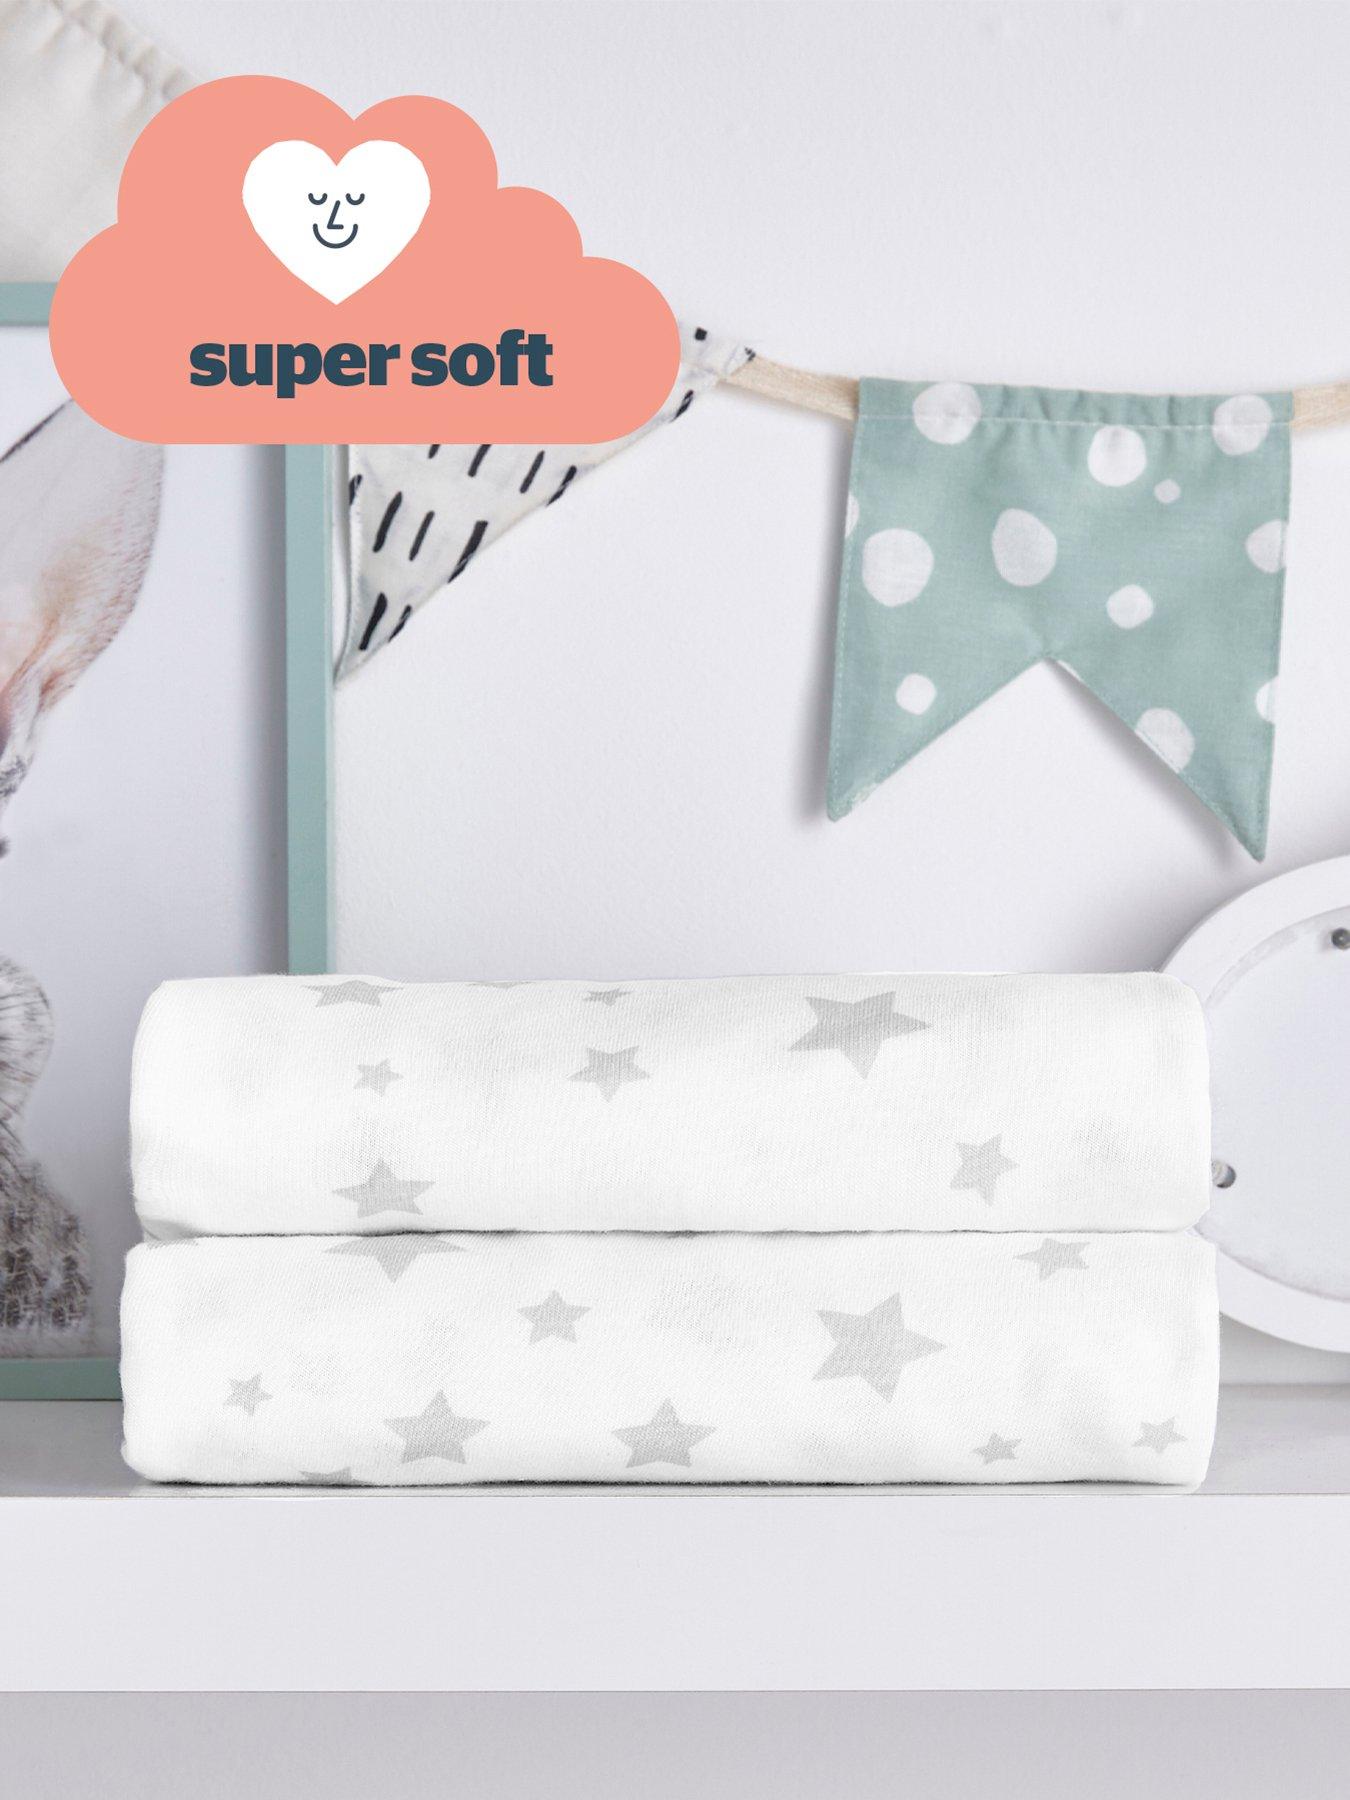 Silentnight Safe Nights 2 X Fitted Sheets Cot Bed Star Print Uk 4317